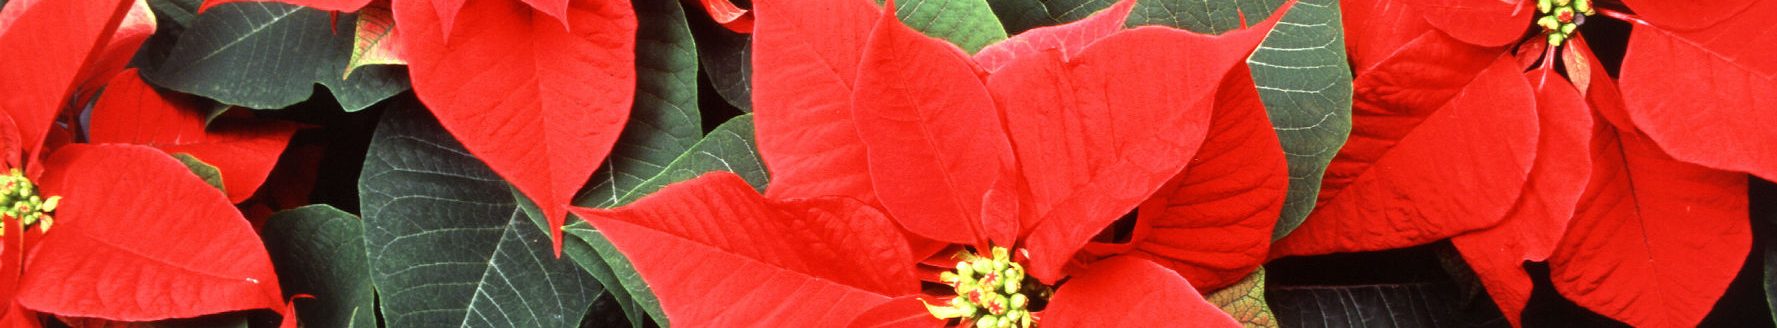 The poinsettia's small flowers are surrounded by colorful leaves called bracts. (Photo by Scott Bauer, Agricultural Research Service.)